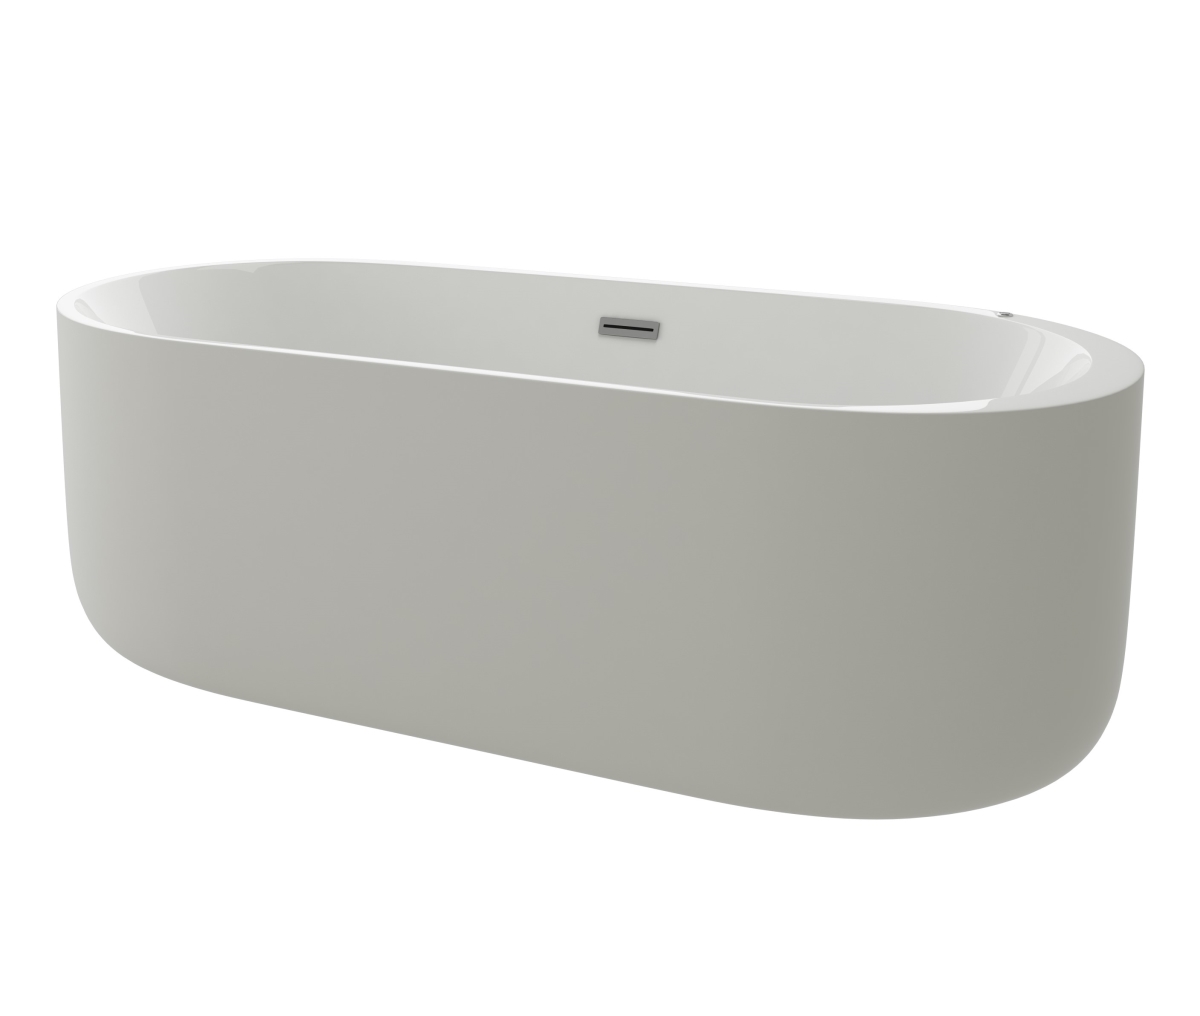 Picture of A&E Bath and Shower BT-601J-67 A&E Bath and Shower  Broxton-NF Bathtub in White